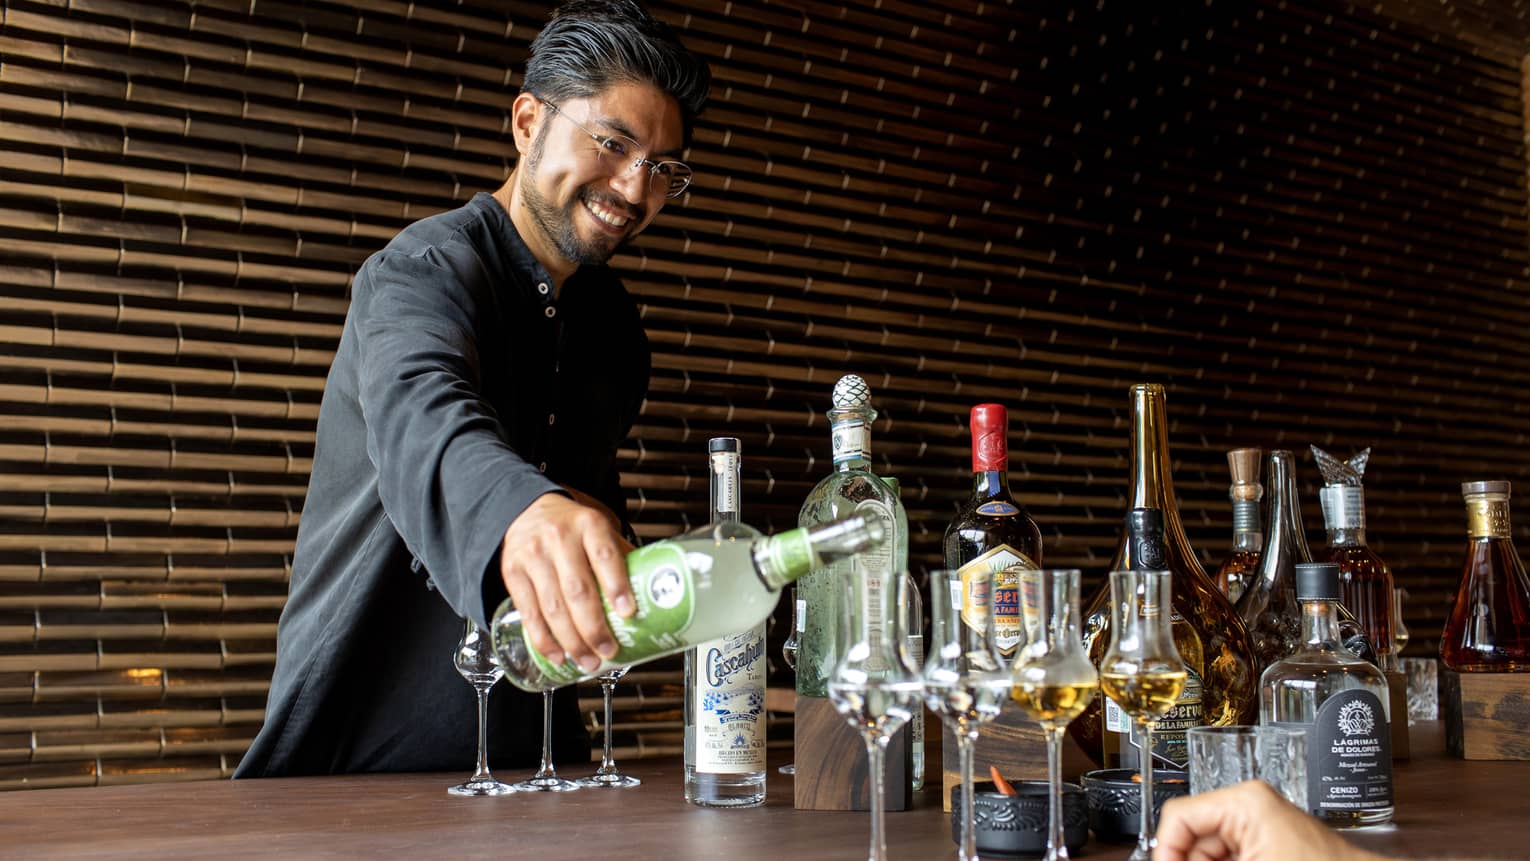 A bartender pours a clear liquor into grappa glasses, two others filled with an amber liquor, aside various other bottles.